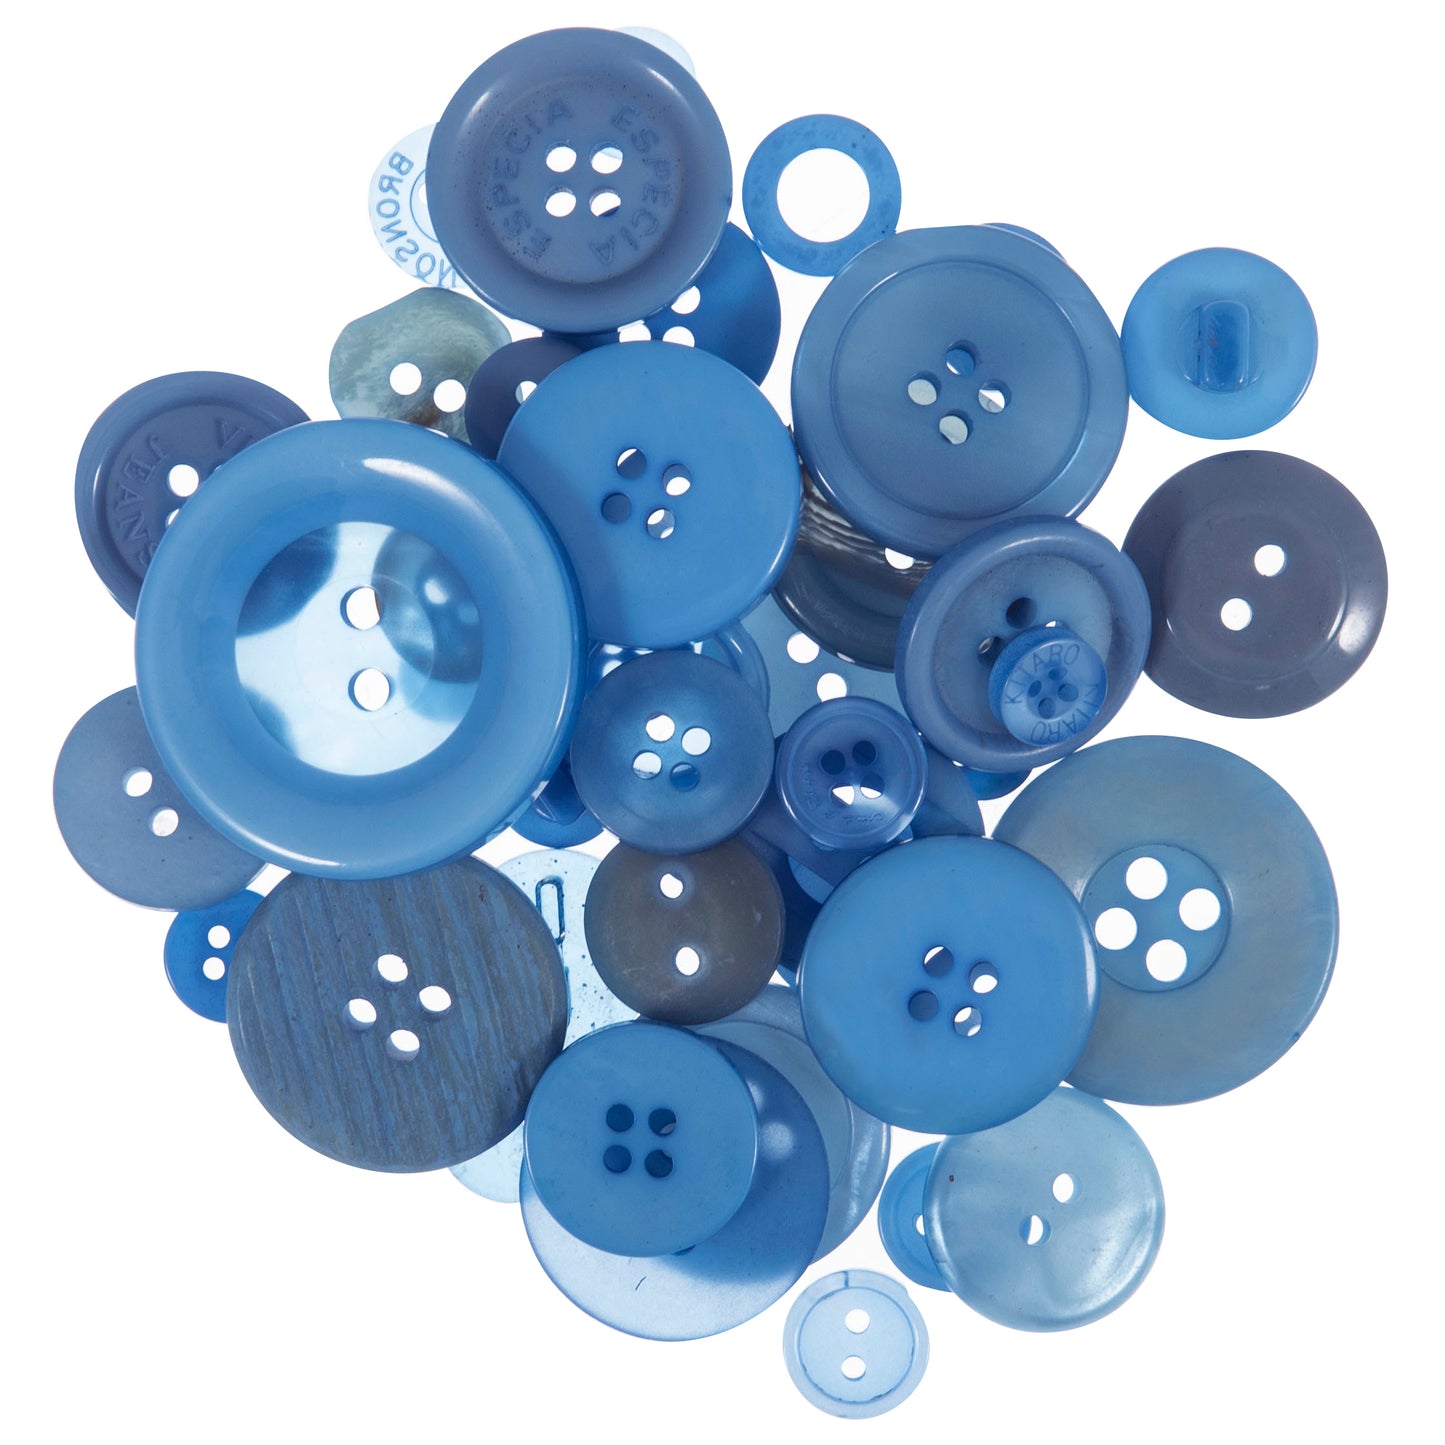 50g Mixed Selection Craft Buttons - Blue